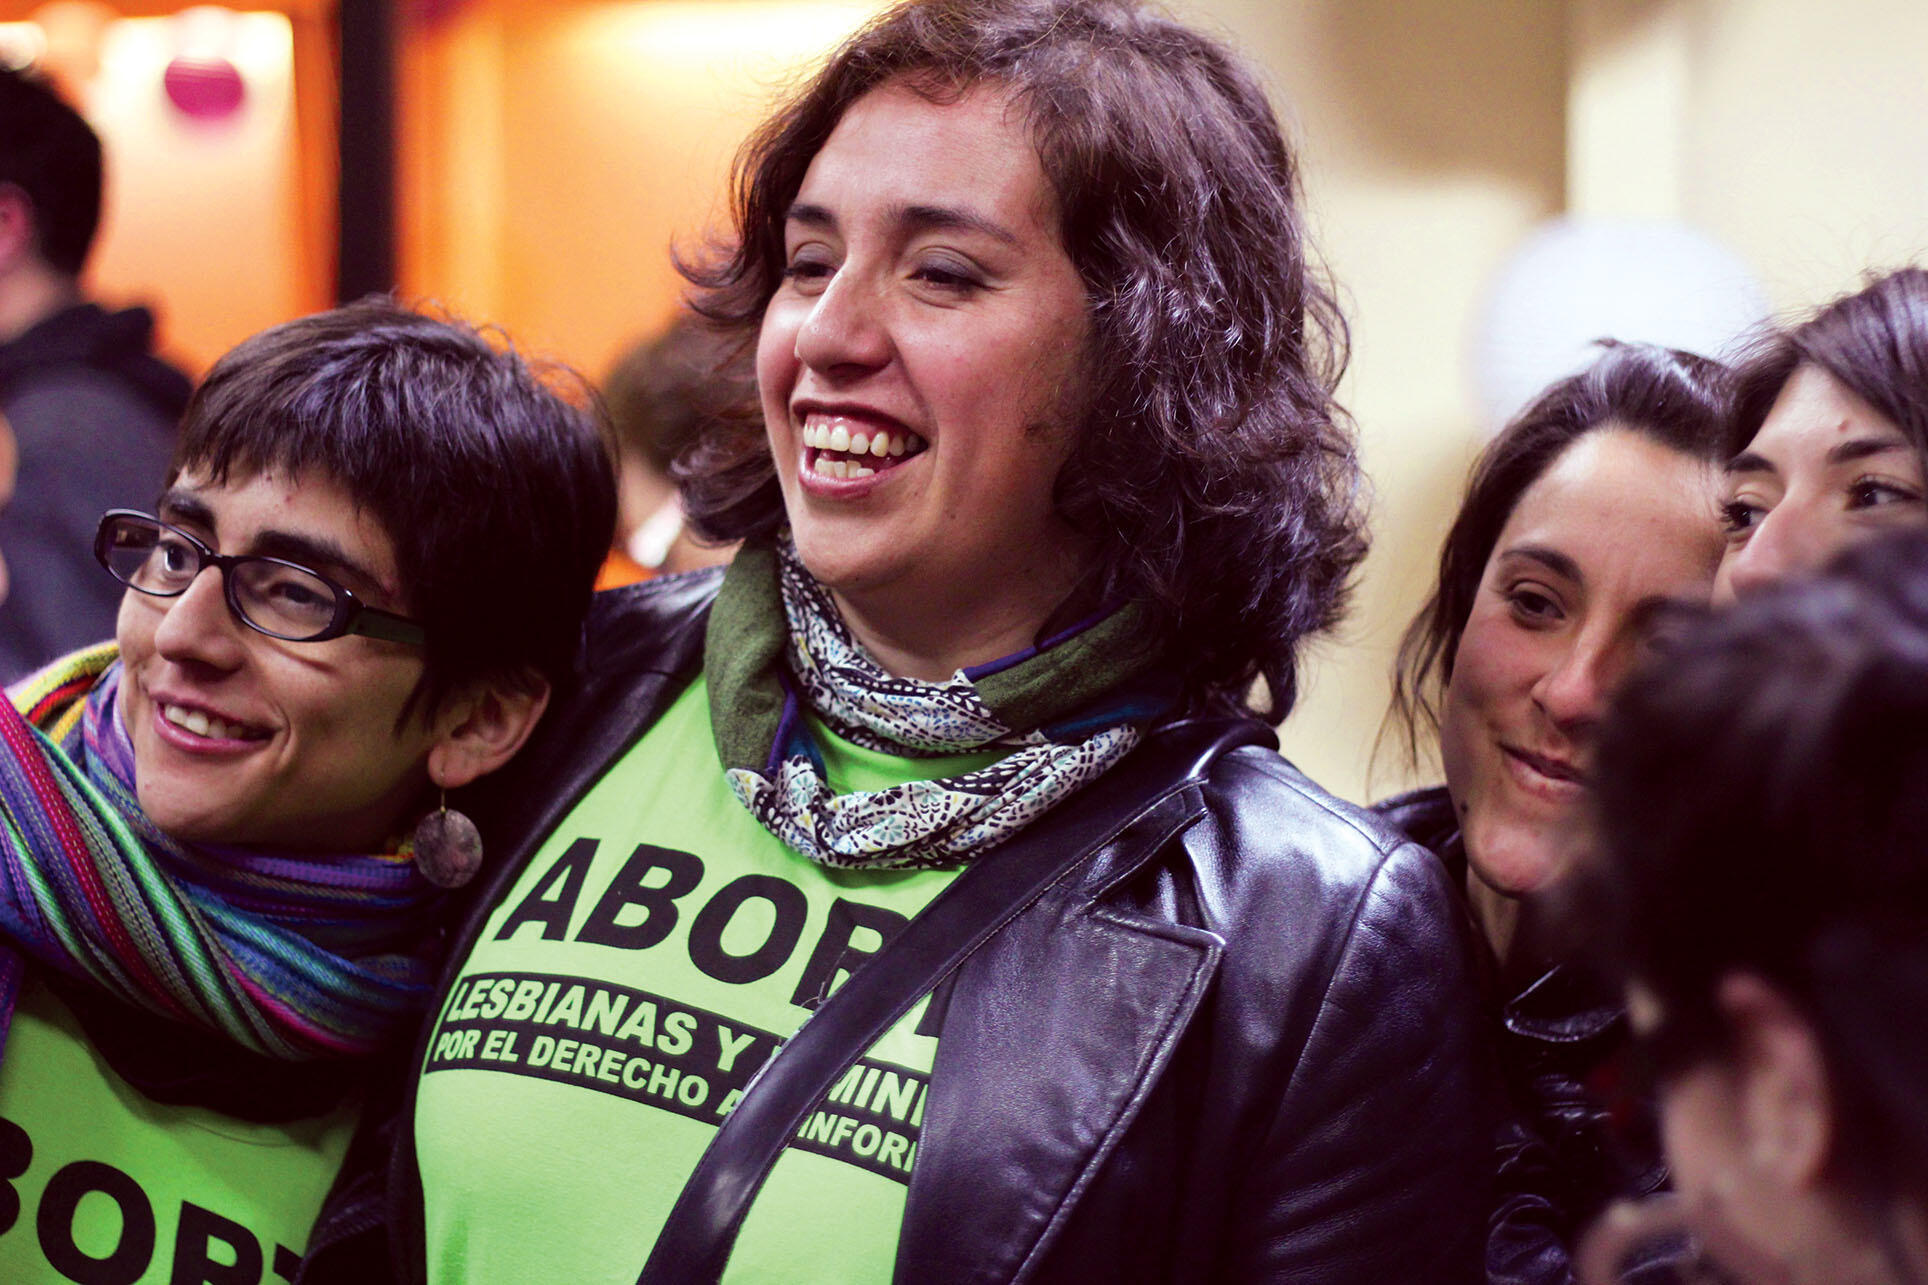 Members of the organization Lesbians and Feminists for the Right to Information, which provides information about misoprostol. (Photo by Catherine del Pino Goldberg, courtesy of Fondo Alquimia, Chile.)